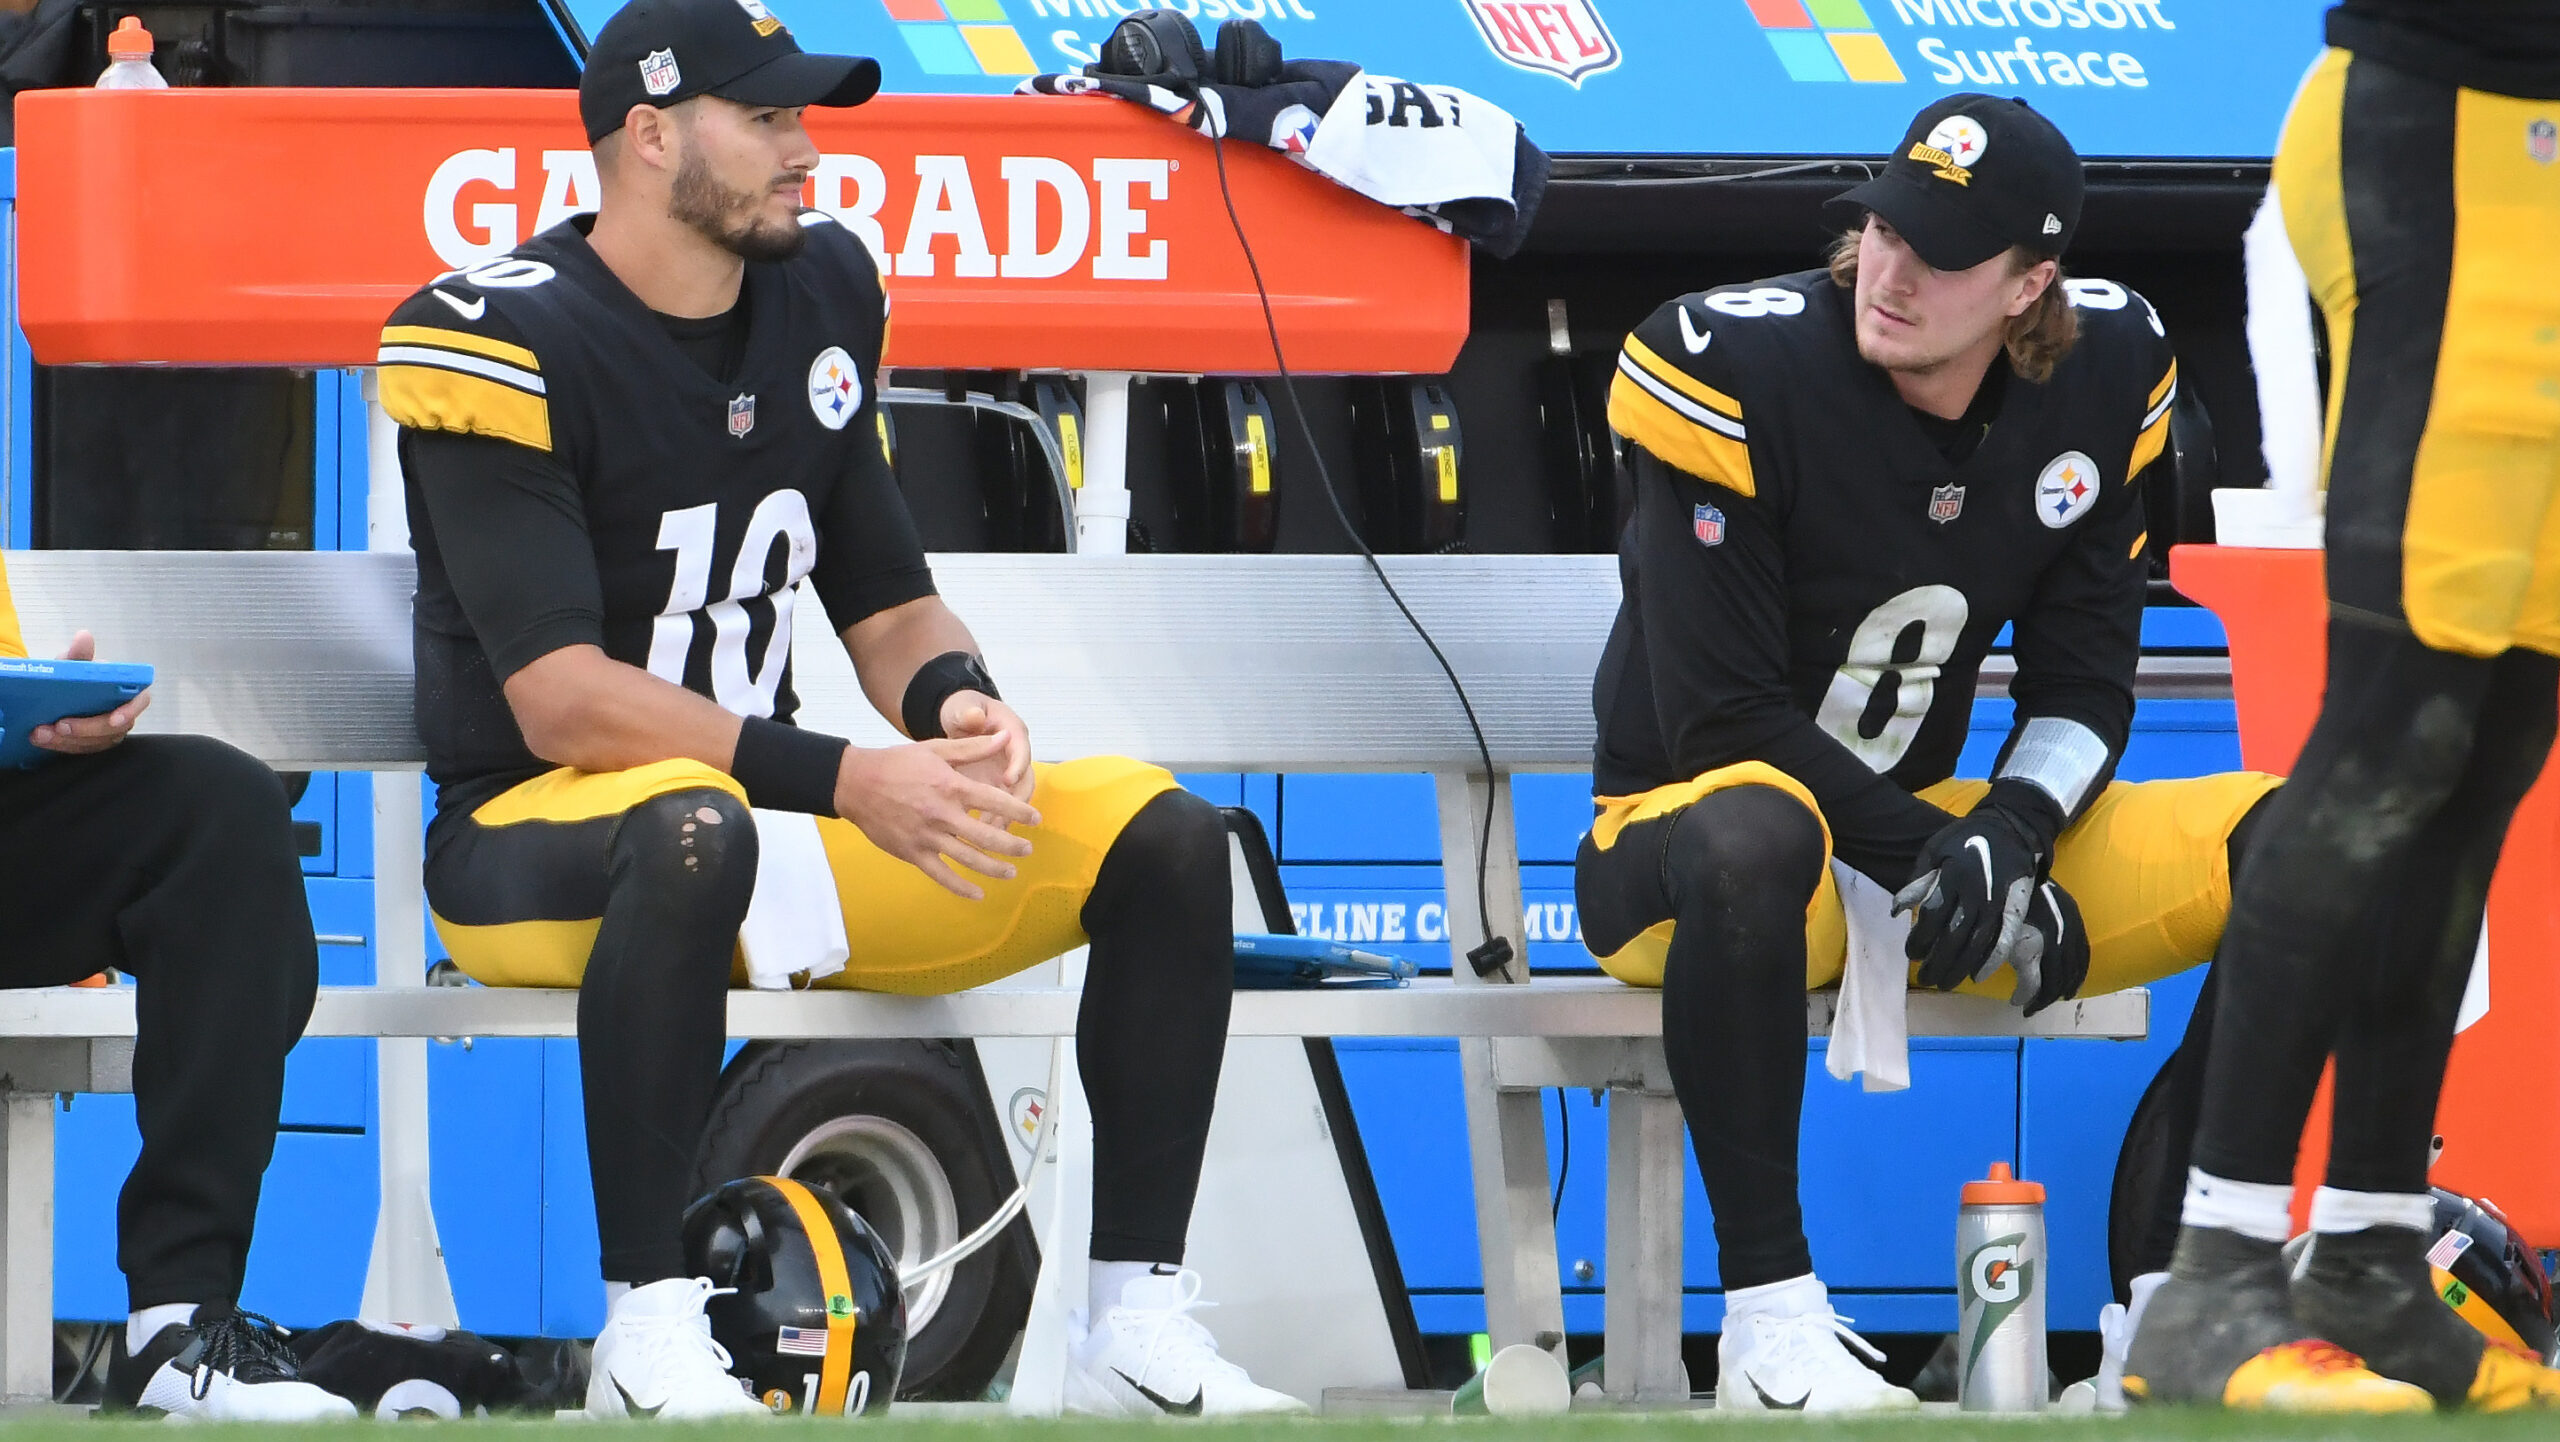 Mitch Turbisky sits with Kenny Pickett on Steelers sideline.